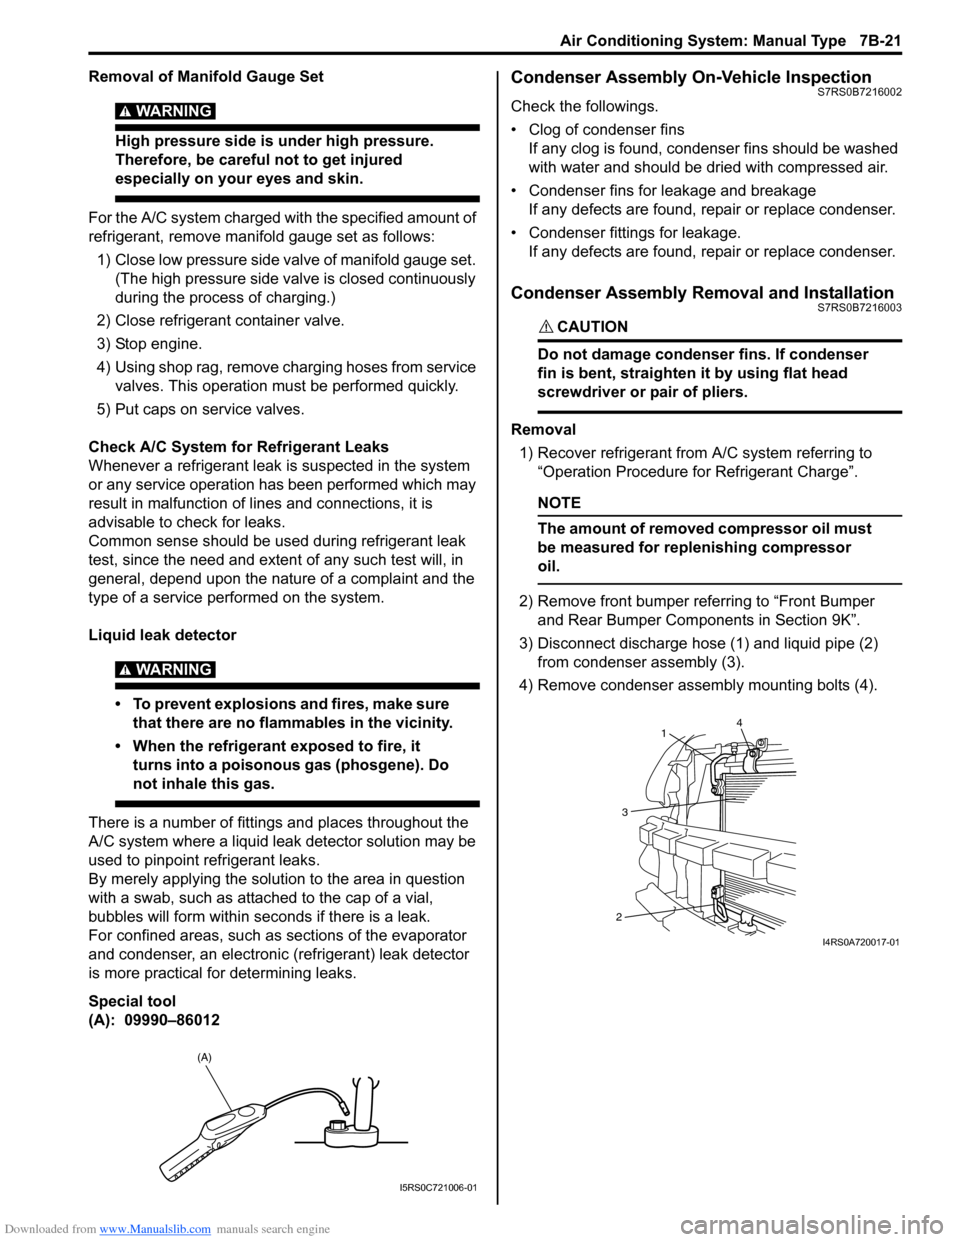 SUZUKI SWIFT 2007 2.G Service Workshop Manual Downloaded from www.Manualslib.com manuals search engine Air Conditioning System: Manual Type 7B-21
Removal of Manifold Gauge Set
WARNING! 
High pressure side is under high pressure. 
Therefore, be ca